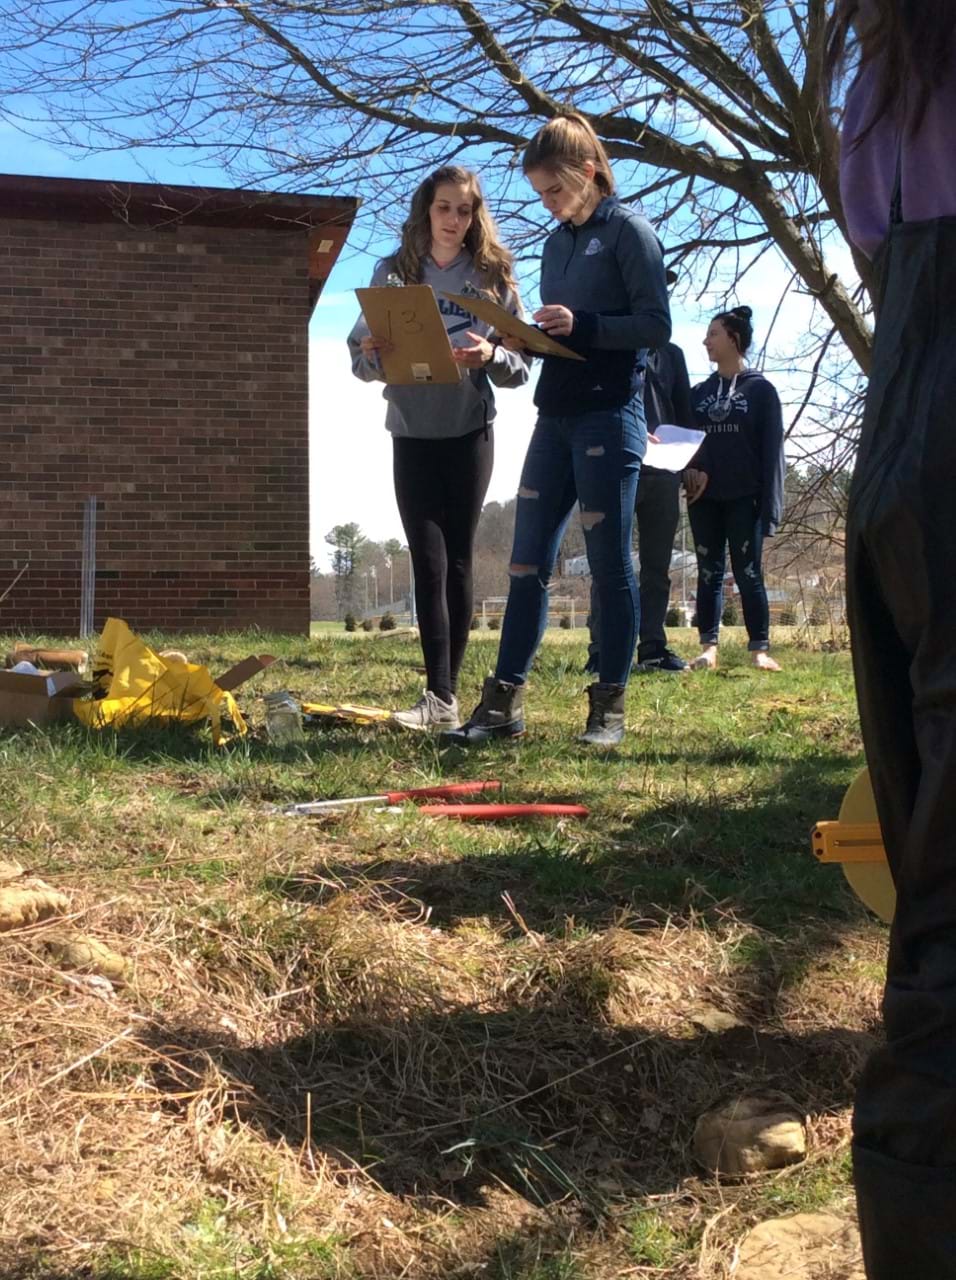 A group of students stands in a school yard as they inventory measuring tools that lay on the grass.